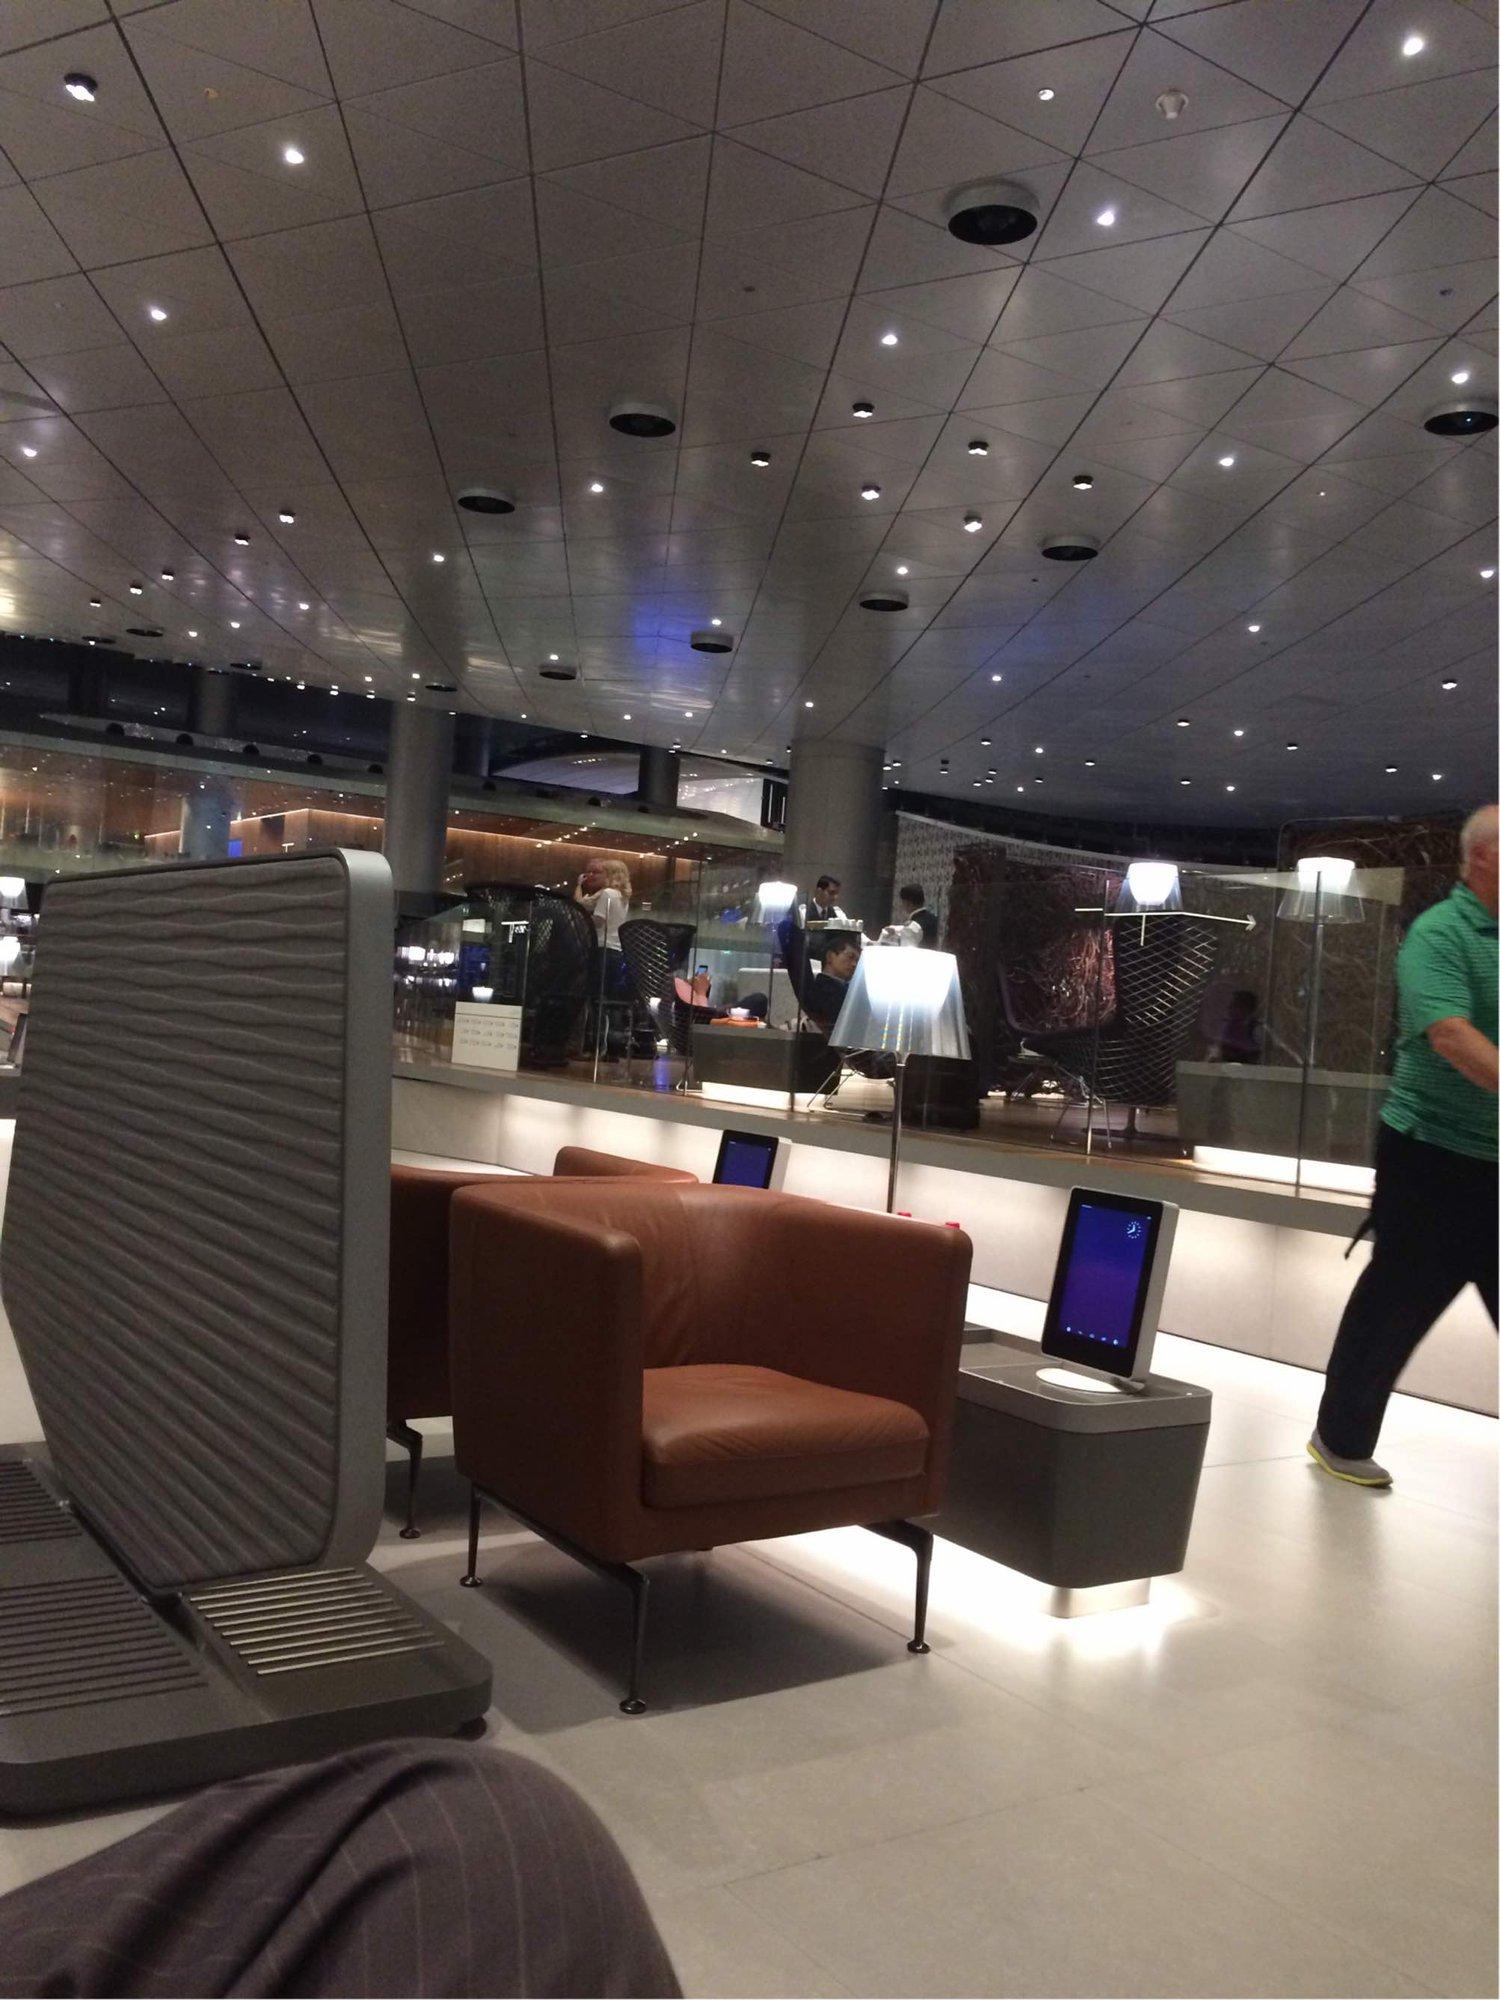 Qatar Airways First and Business Class Arrivals Lounge (Before Immigration) image 1 of 1